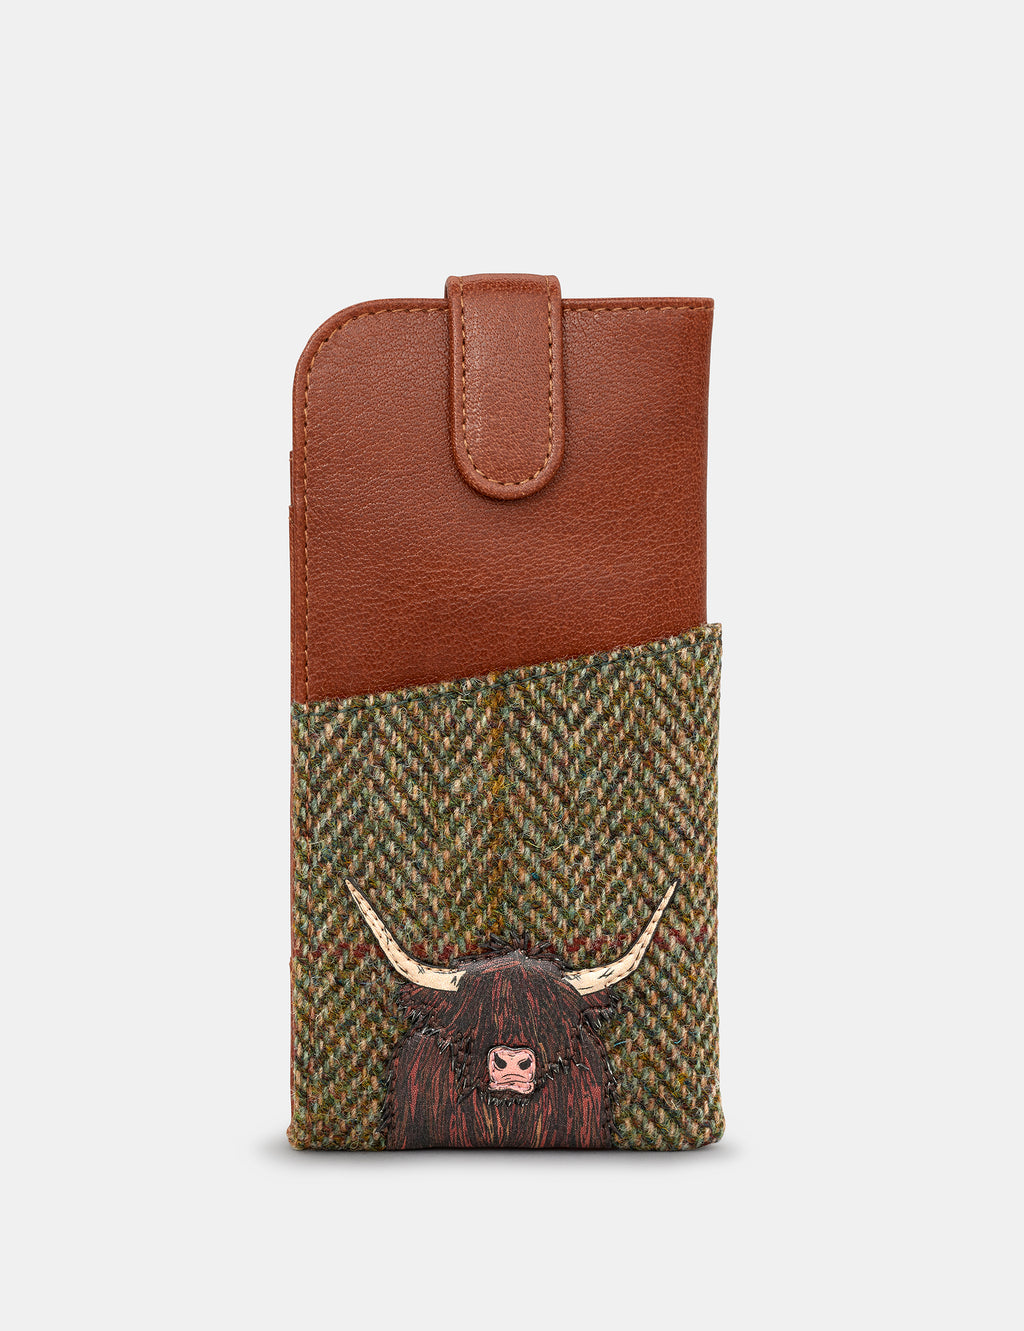 Highland Cow Tweed Leather Glasses Case